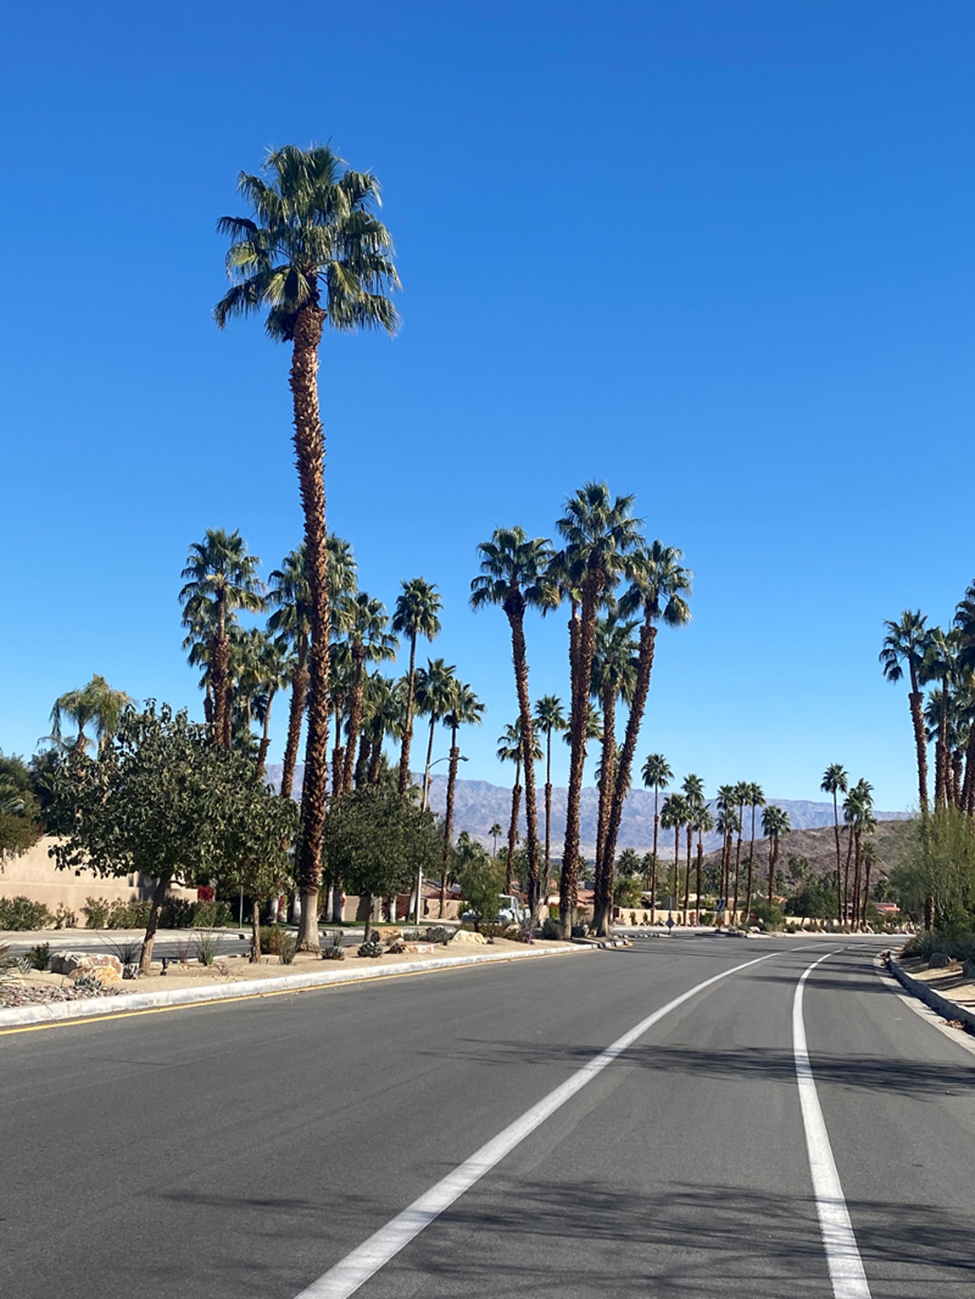 6 REASONS YOU SHOULD NOT BUY THE LOUIS VUITTON PALM SPRINGS